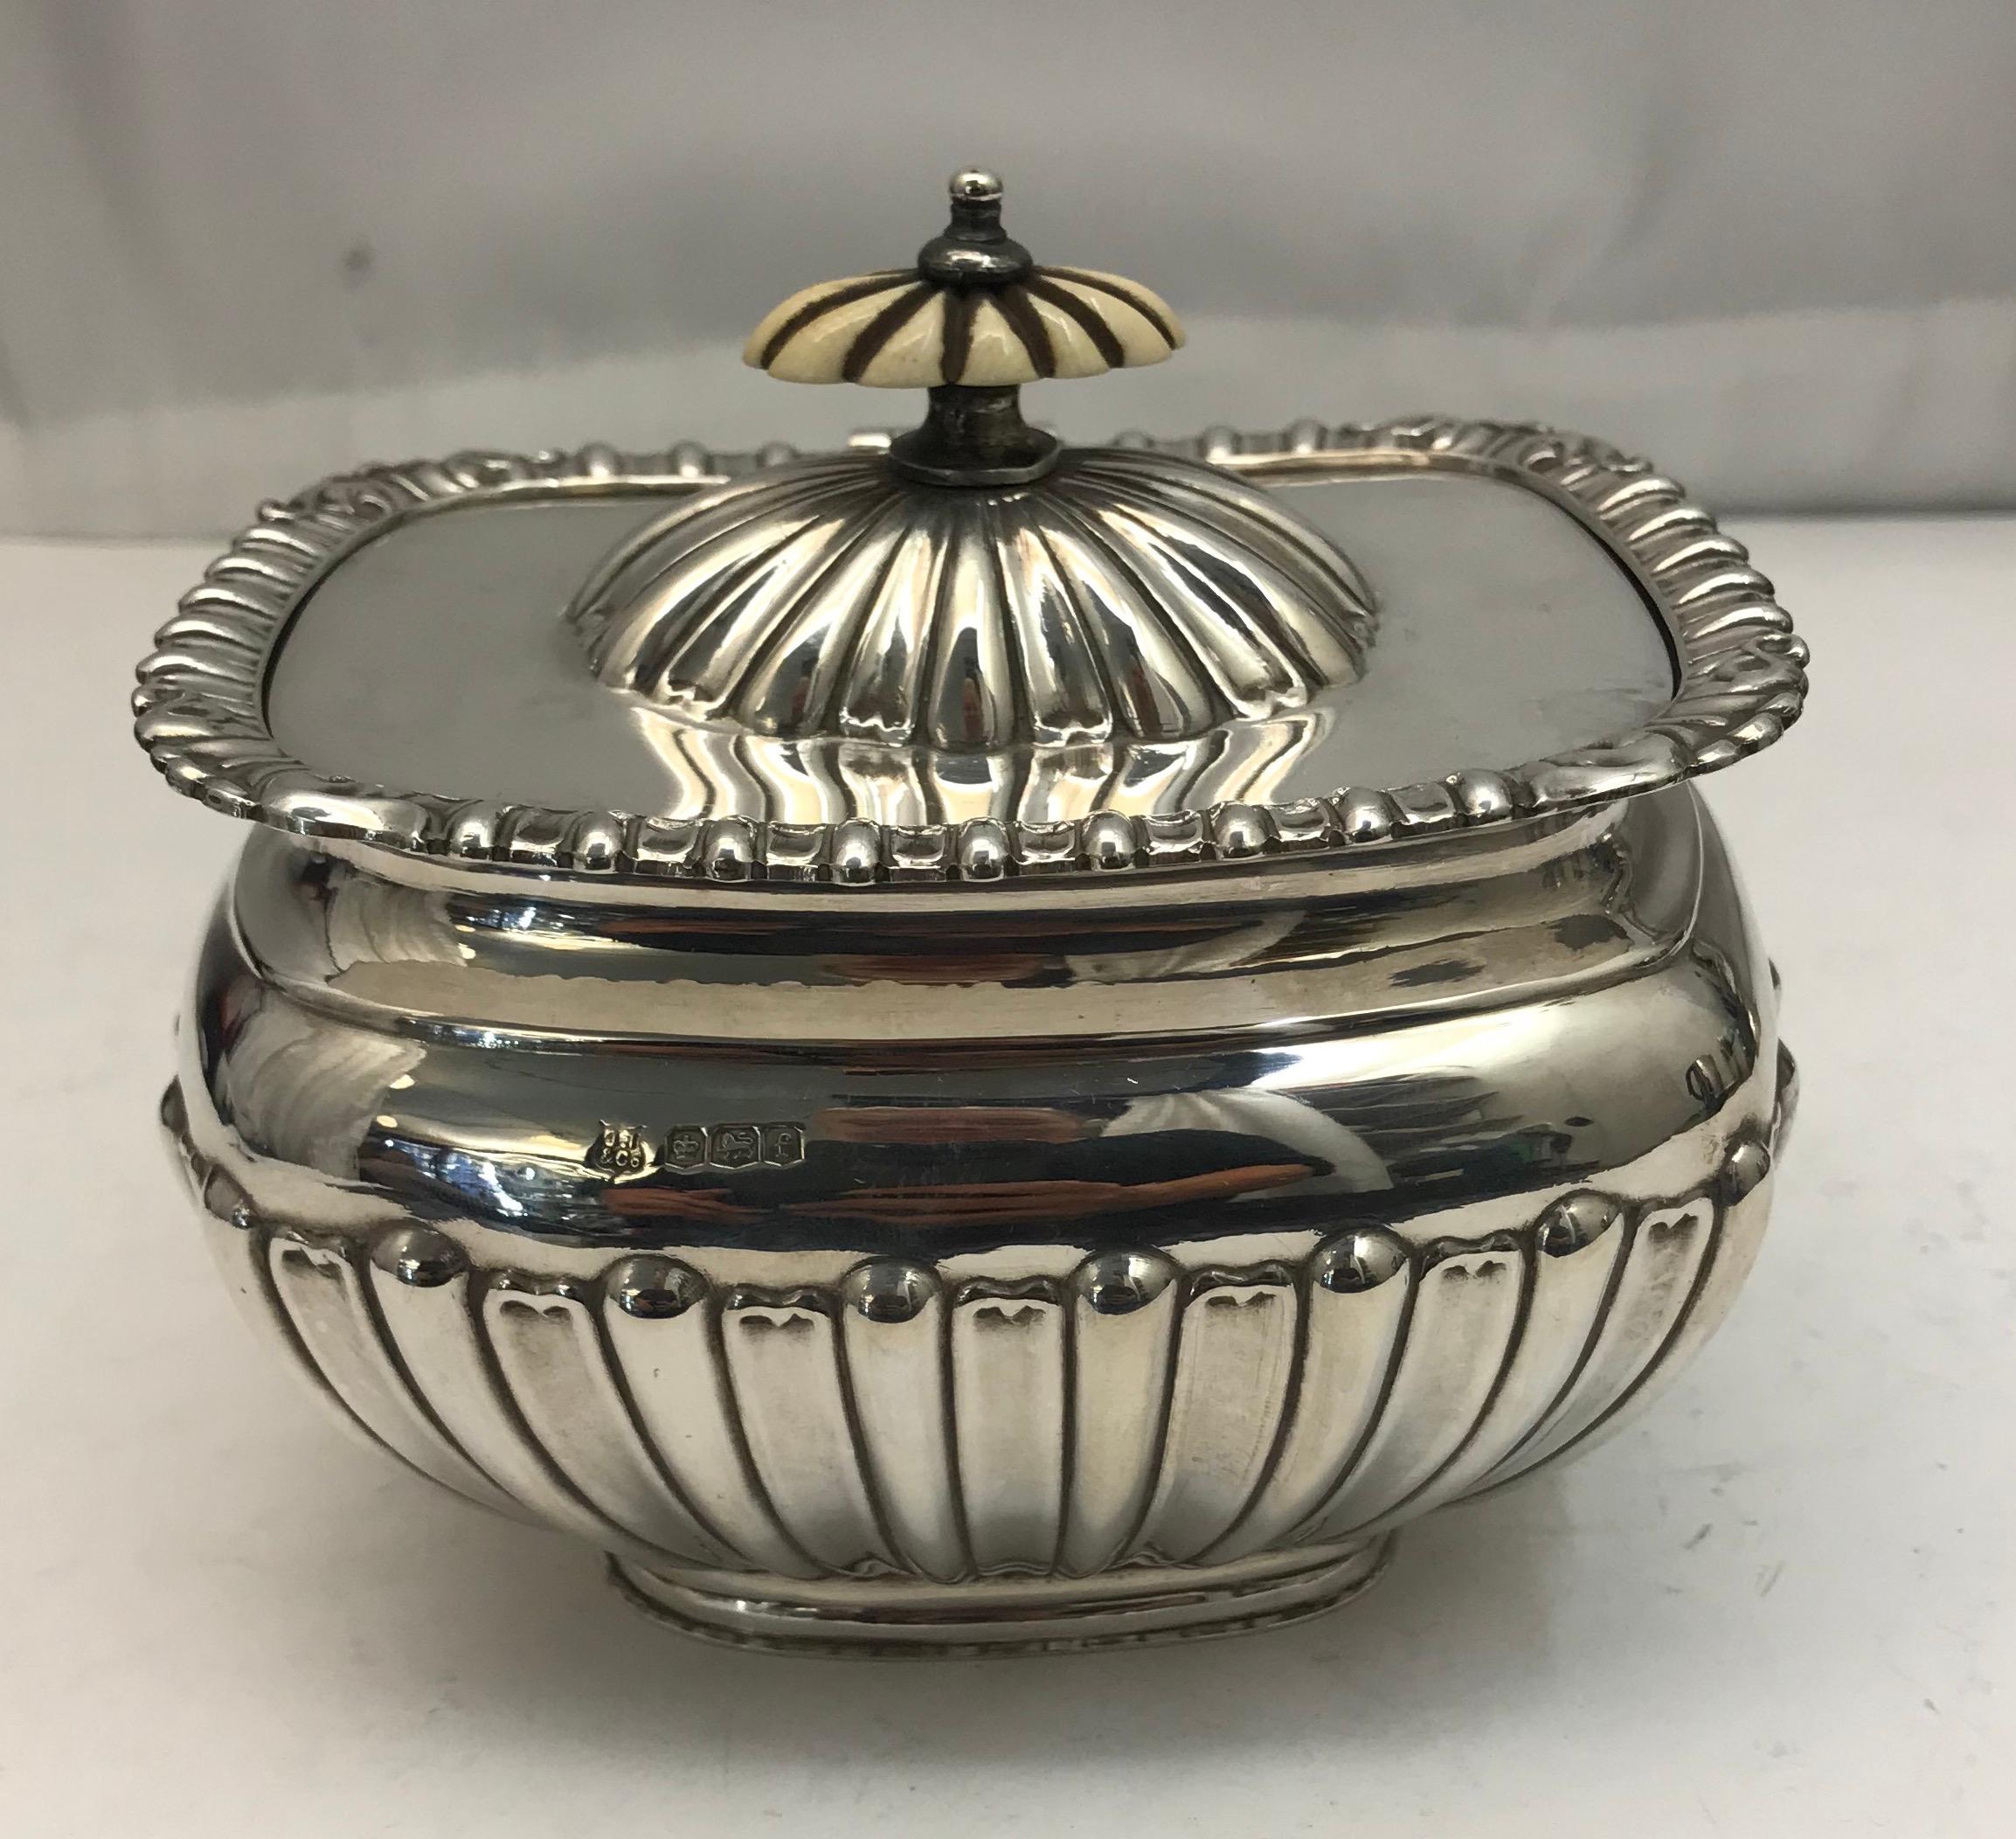 Antique Silver Tea Caddy In Good Condition For Sale In London, London